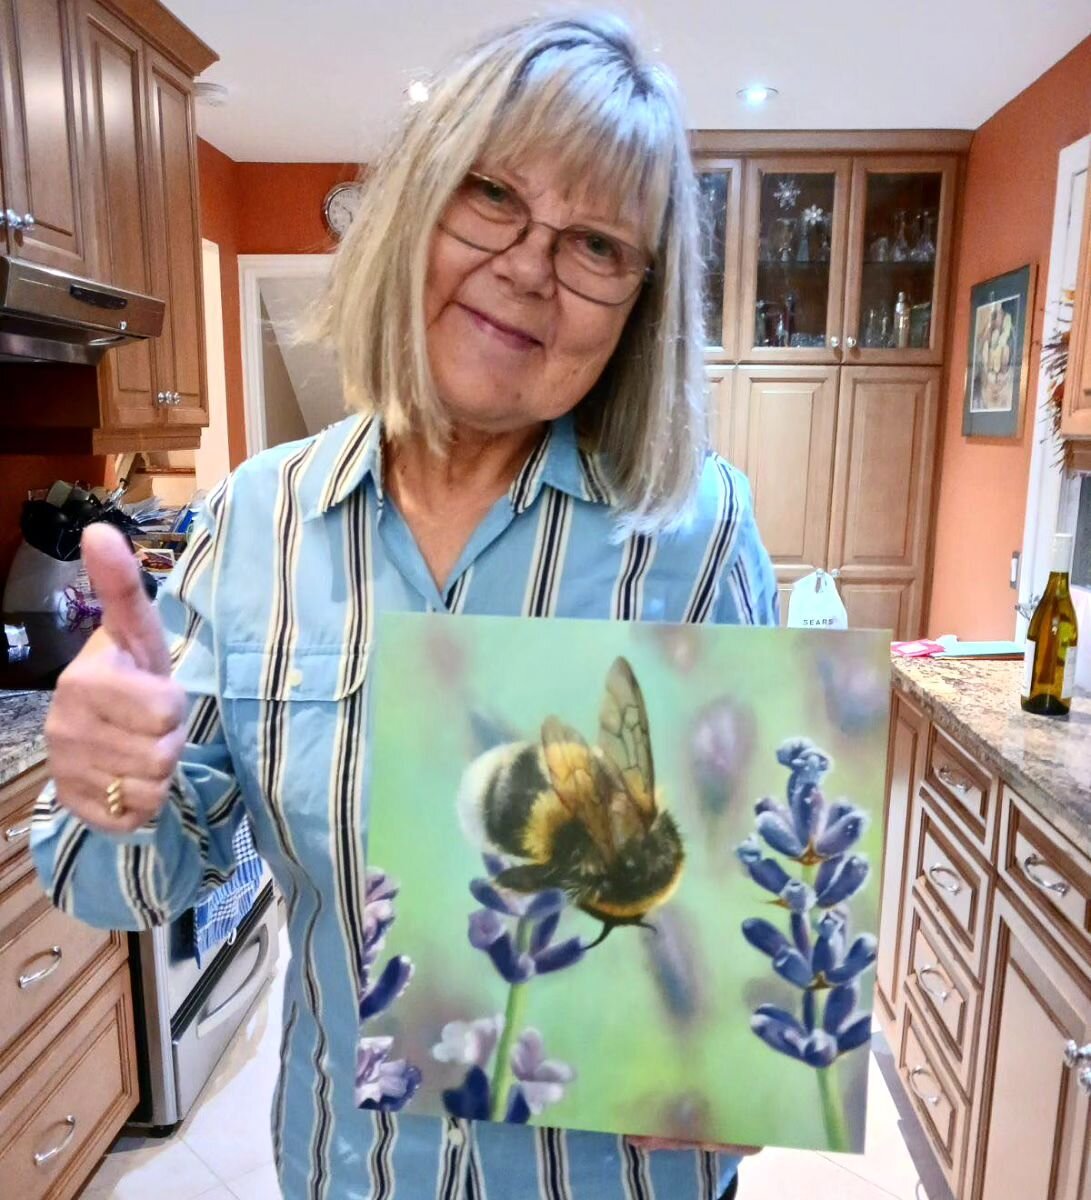 M E A N T  T O  B E E 🐝

A cute story for you today! My sister-in-law's dad's partner here was admiring my Bee painting online from Ontario. It so happened her partner (who she had not mentioned the Bee painting to) was traveling to the  Comox Valle